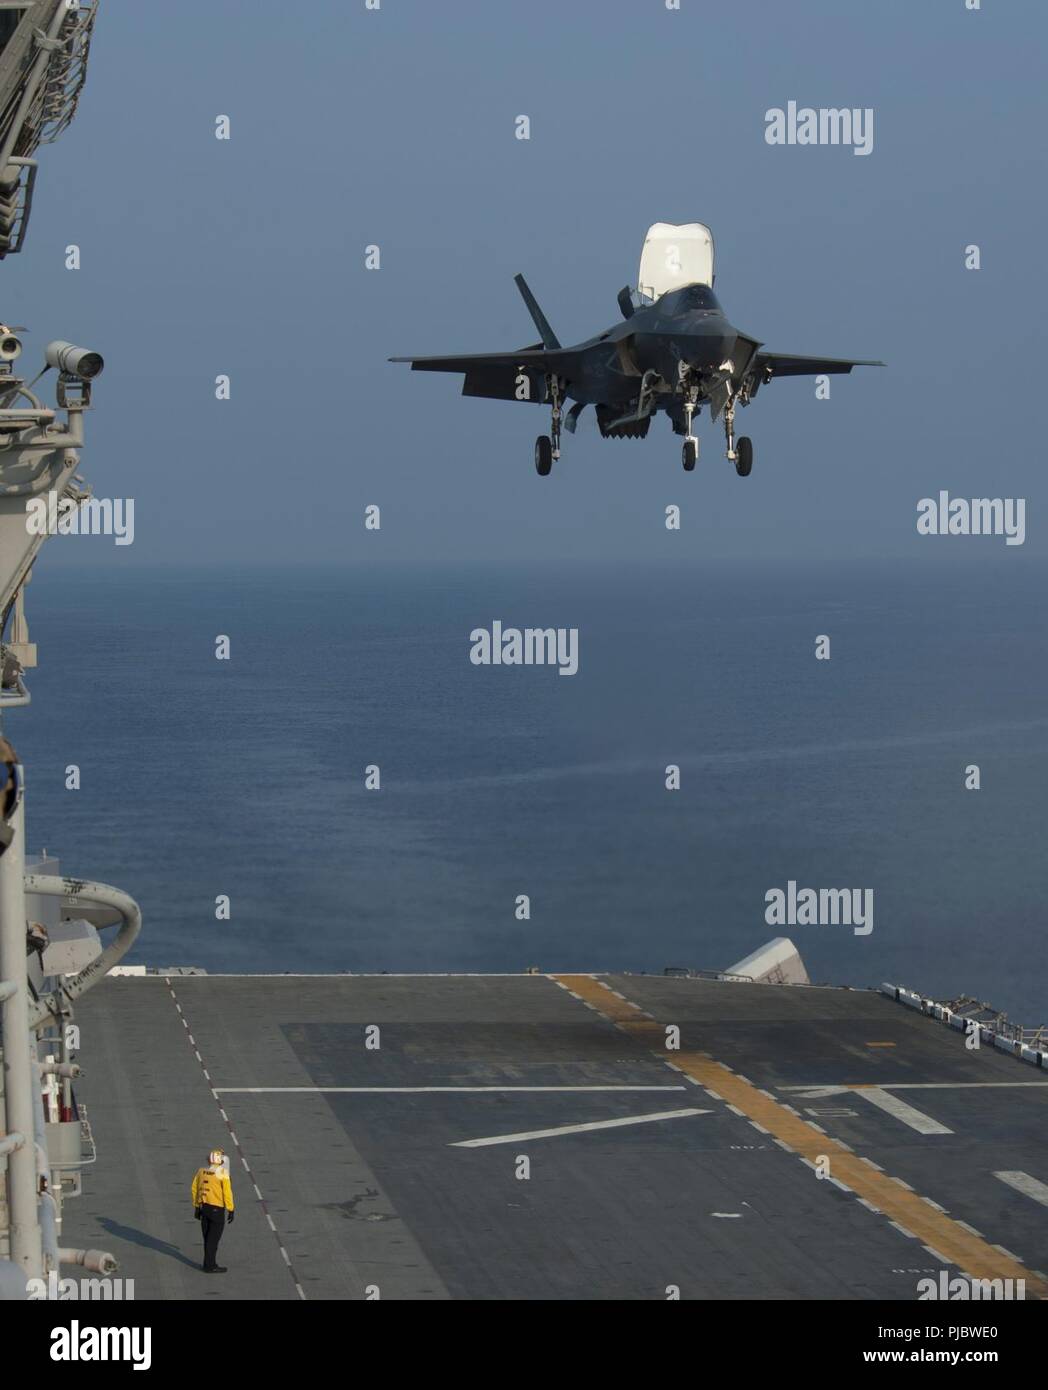 PACIFIC OCEAN (July 17, 2018) An F-35B Lightning II aircraft assigned to Marine Fighter Attack Squadron 121(VMMFA 121) lands on the flight deck of the amphibious assault ship USS Wasp (LHD 1) during carrier qualifications and flight deck certifications. VMFA-121 is aboard Wasp assigned under the 31st Marine Expeditionary Unit forward deployed to Okinawa, Japan. Stock Photo